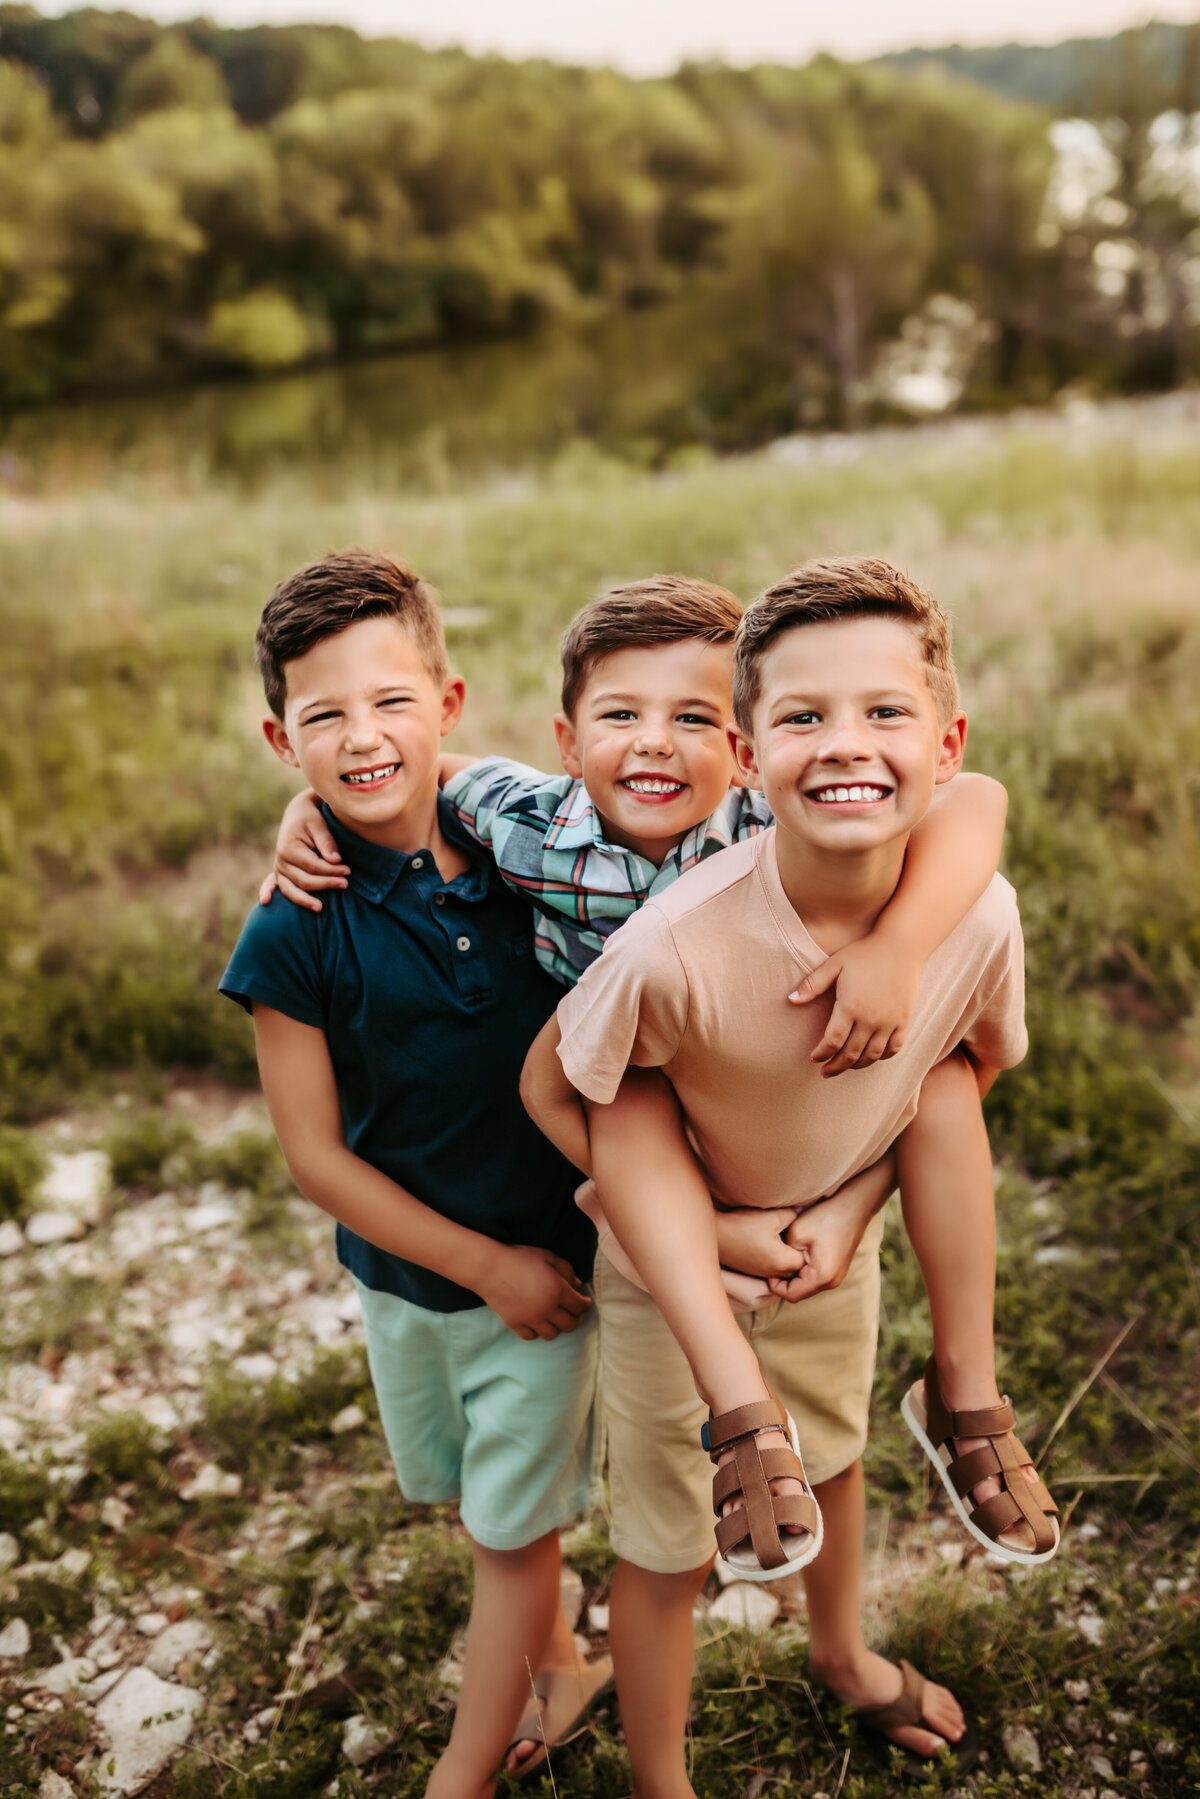 Three brothers give piggy back rides and smile at the camera